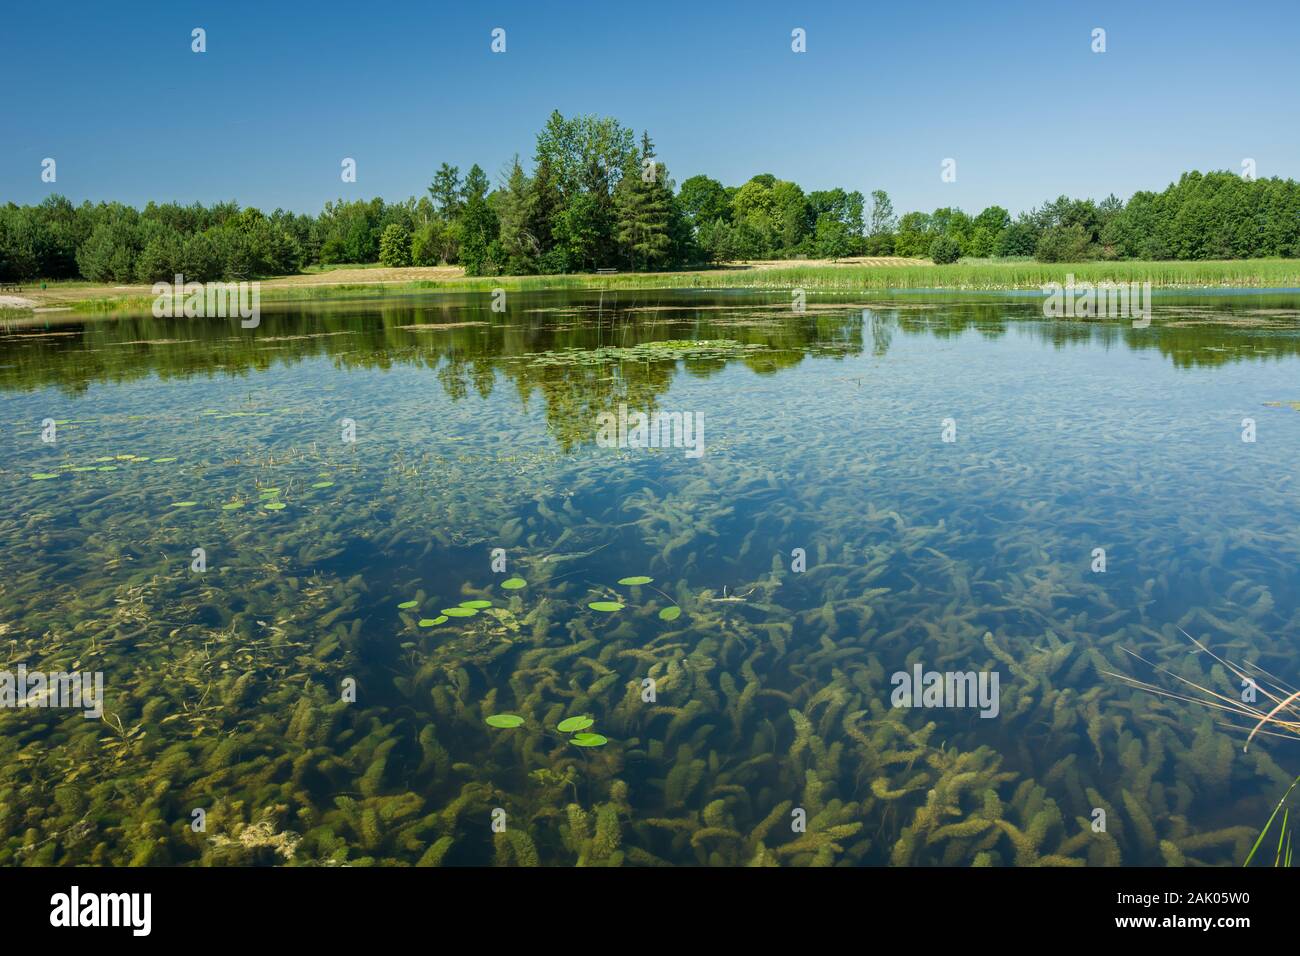 View of plants under water, trees on the shore and blue sky. Dubienka, Poland Stock Photo